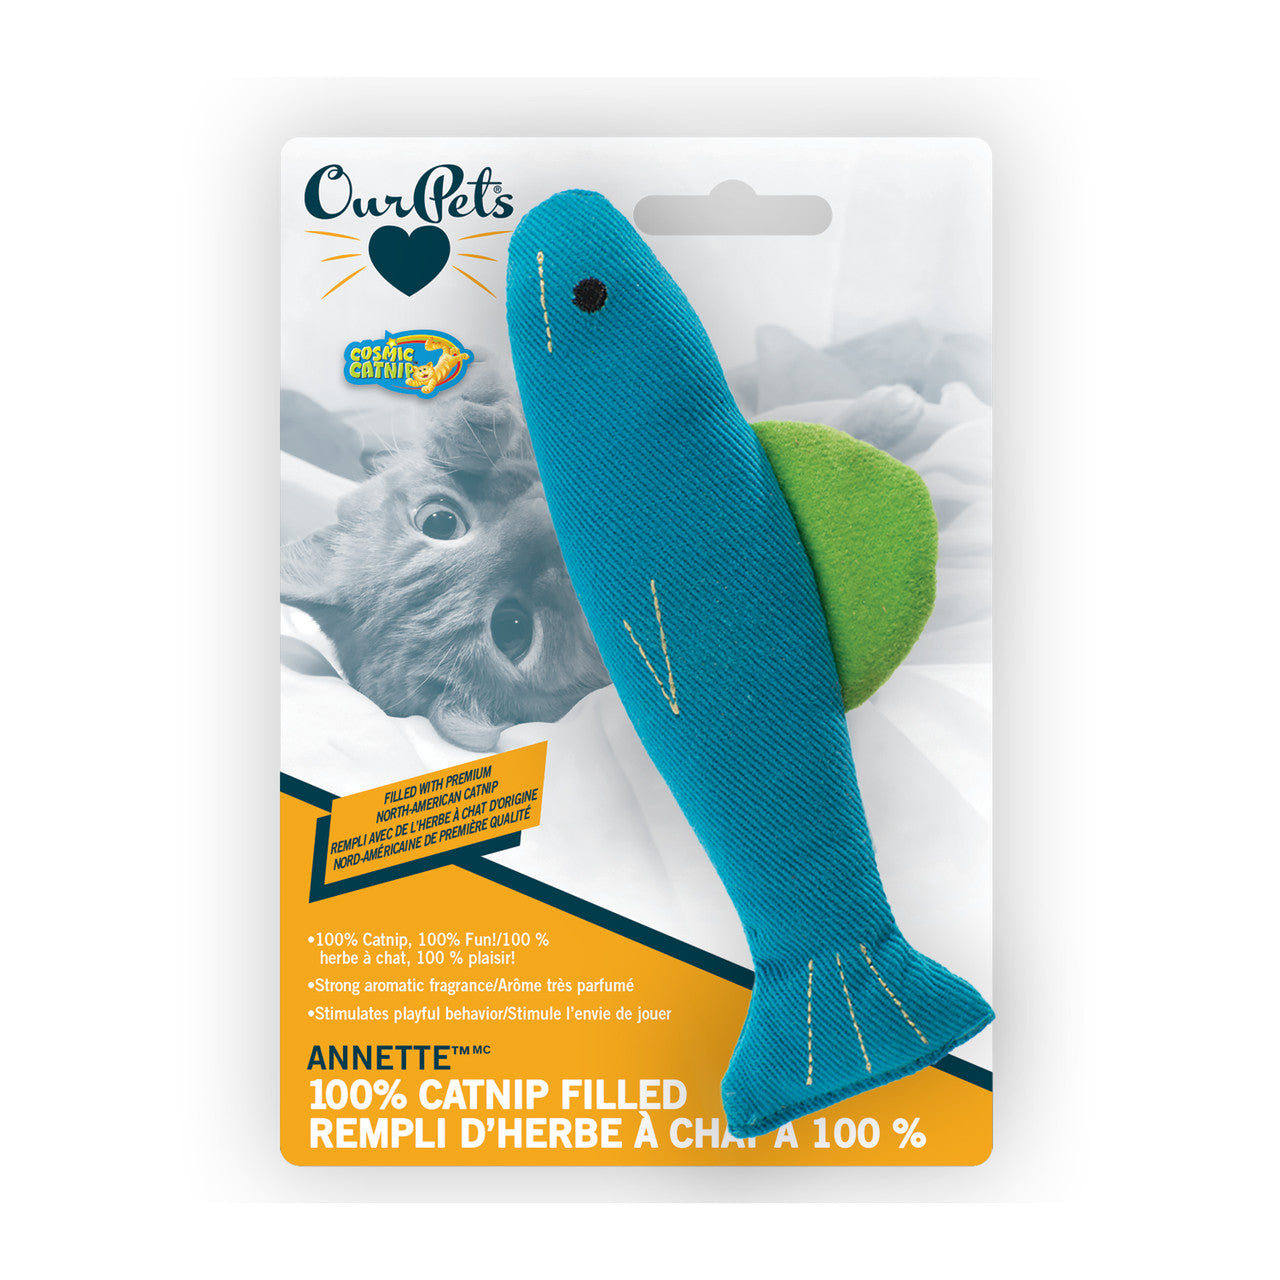 OurPets 100% Catnip Filled Fish 'Annette' Cat Toy Blue